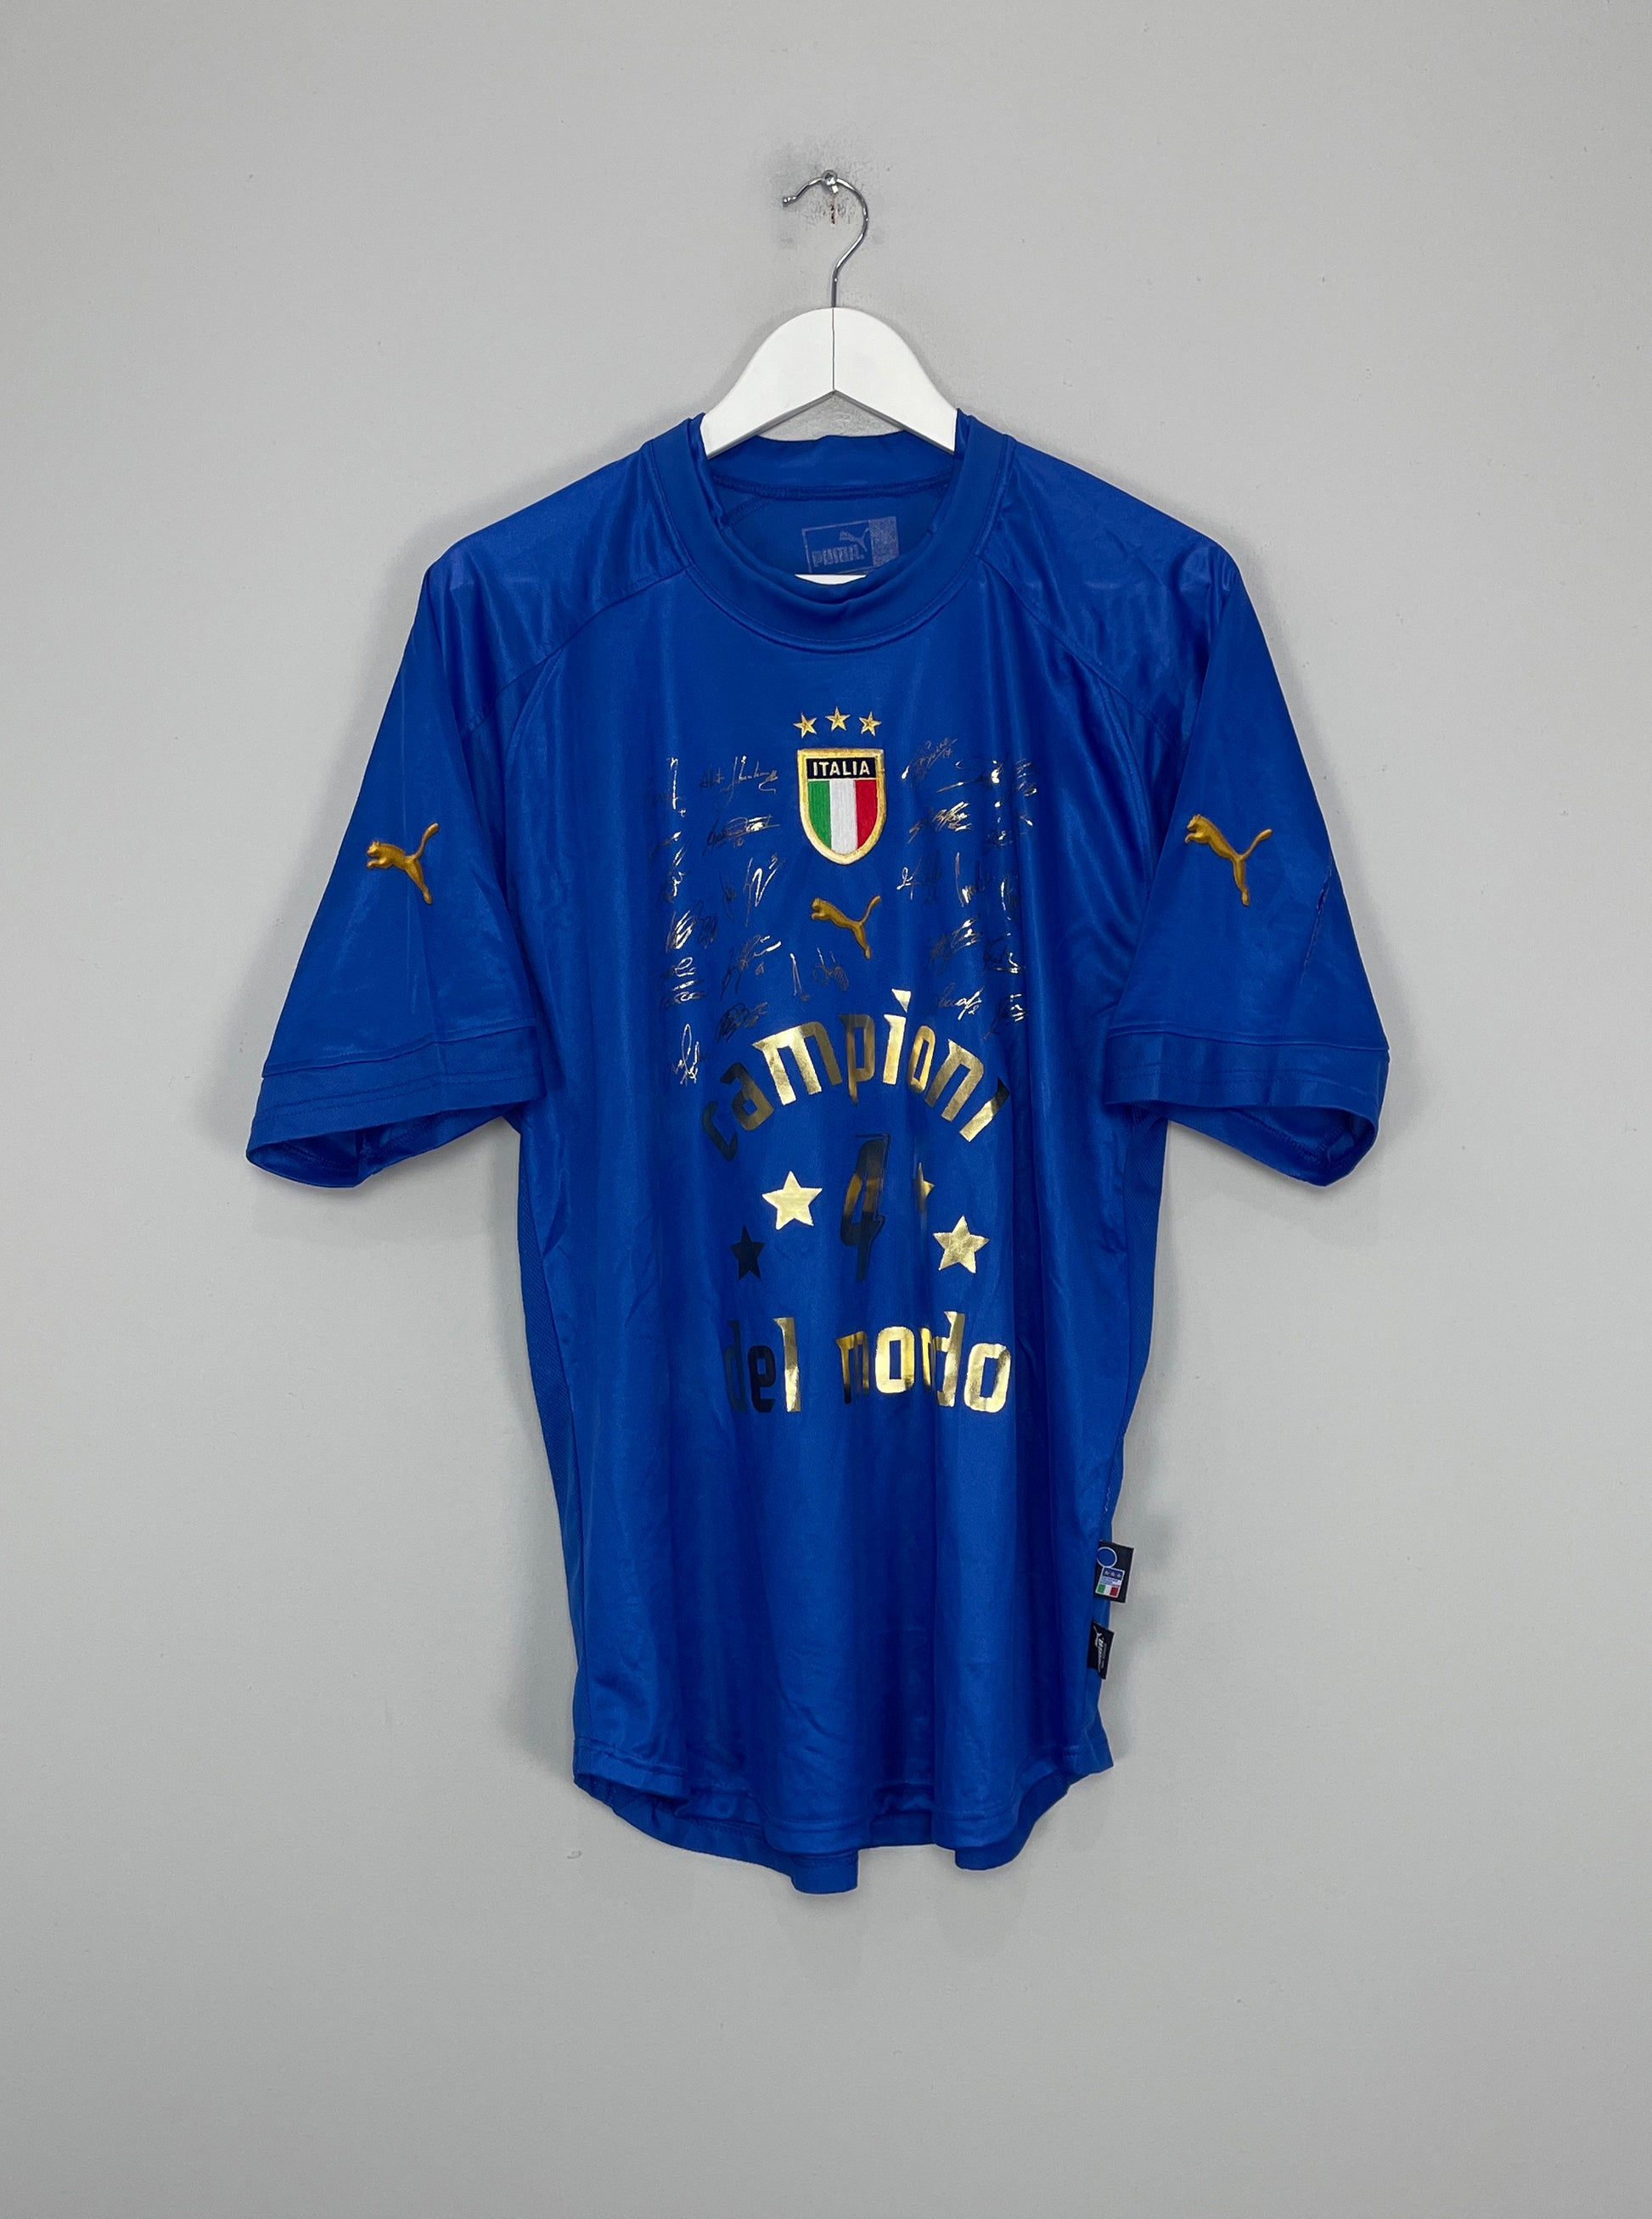 Image of the Italy shirt from the 2004/05 season